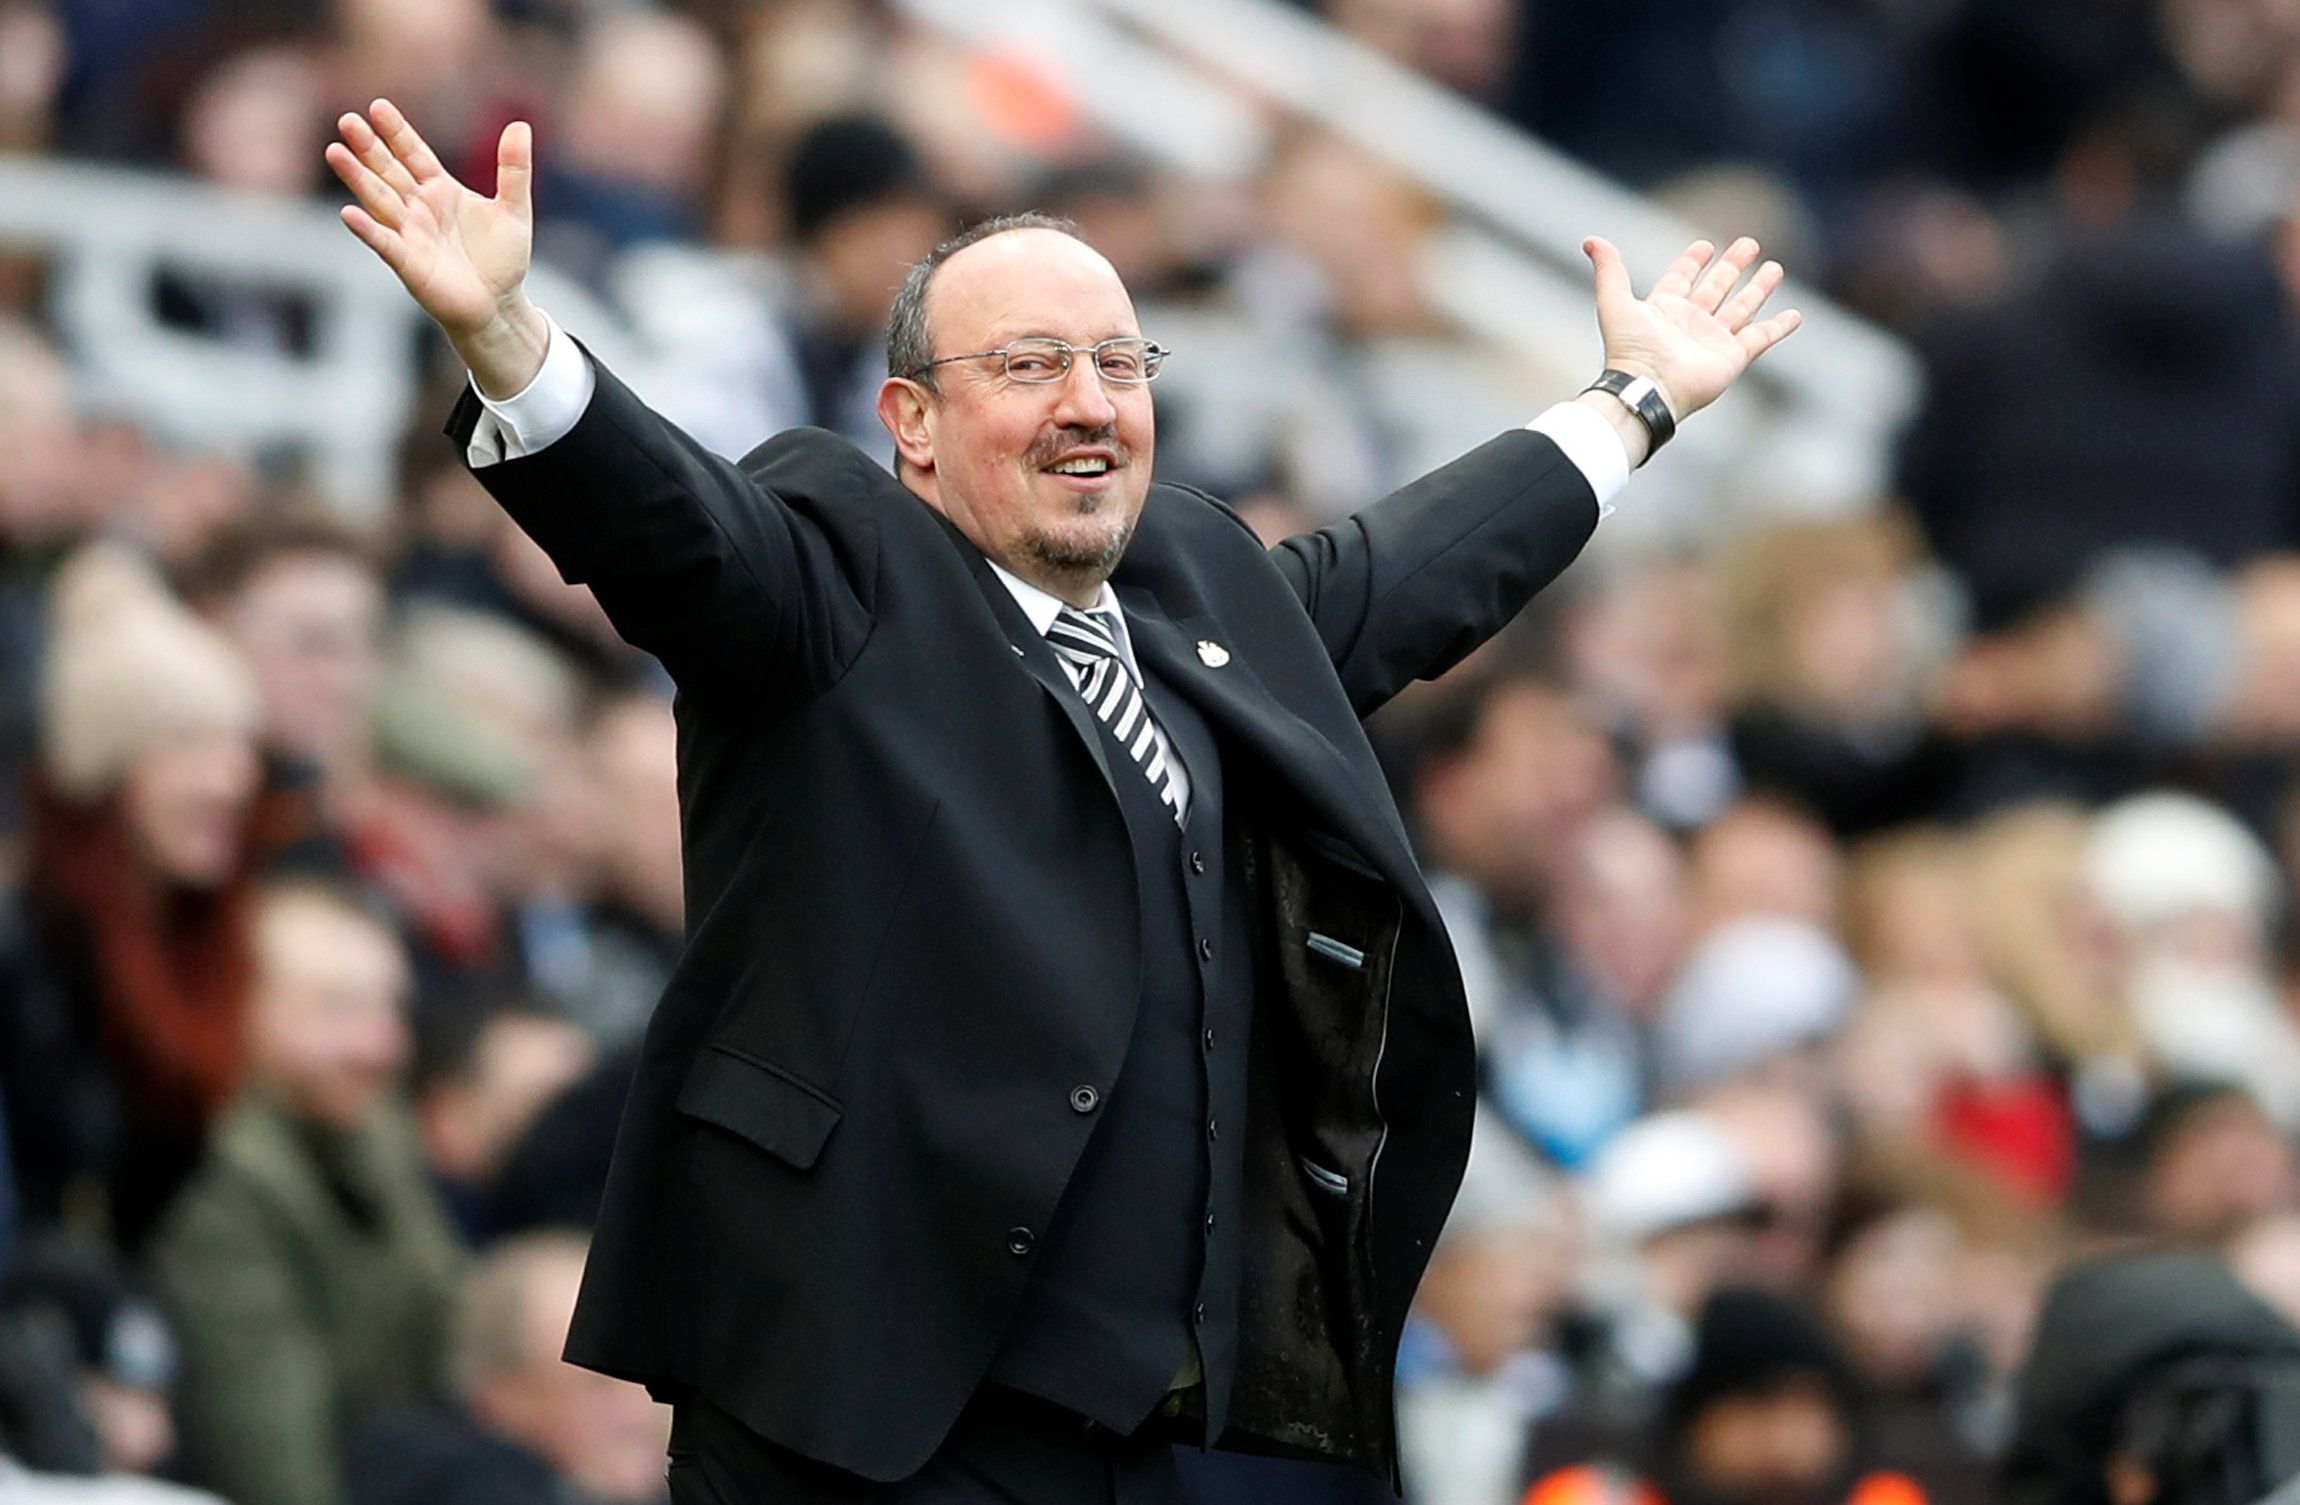 Soccer Football - Premier League - Newcastle United vs Manchester United - St James' Park, Newcastle, Britain - February 11, 2018   Newcastle United manager Rafael Benitez reacts   Action Images via Reuters/Carl Recine    EDITORIAL USE ONLY. No use with unauthorized audio, video, data, fixture lists, club/league logos or "live" services. Online in-match use limited to 75 images, no video emulation. No use in betting, games or single club/league/player publications.  Please contact your account r